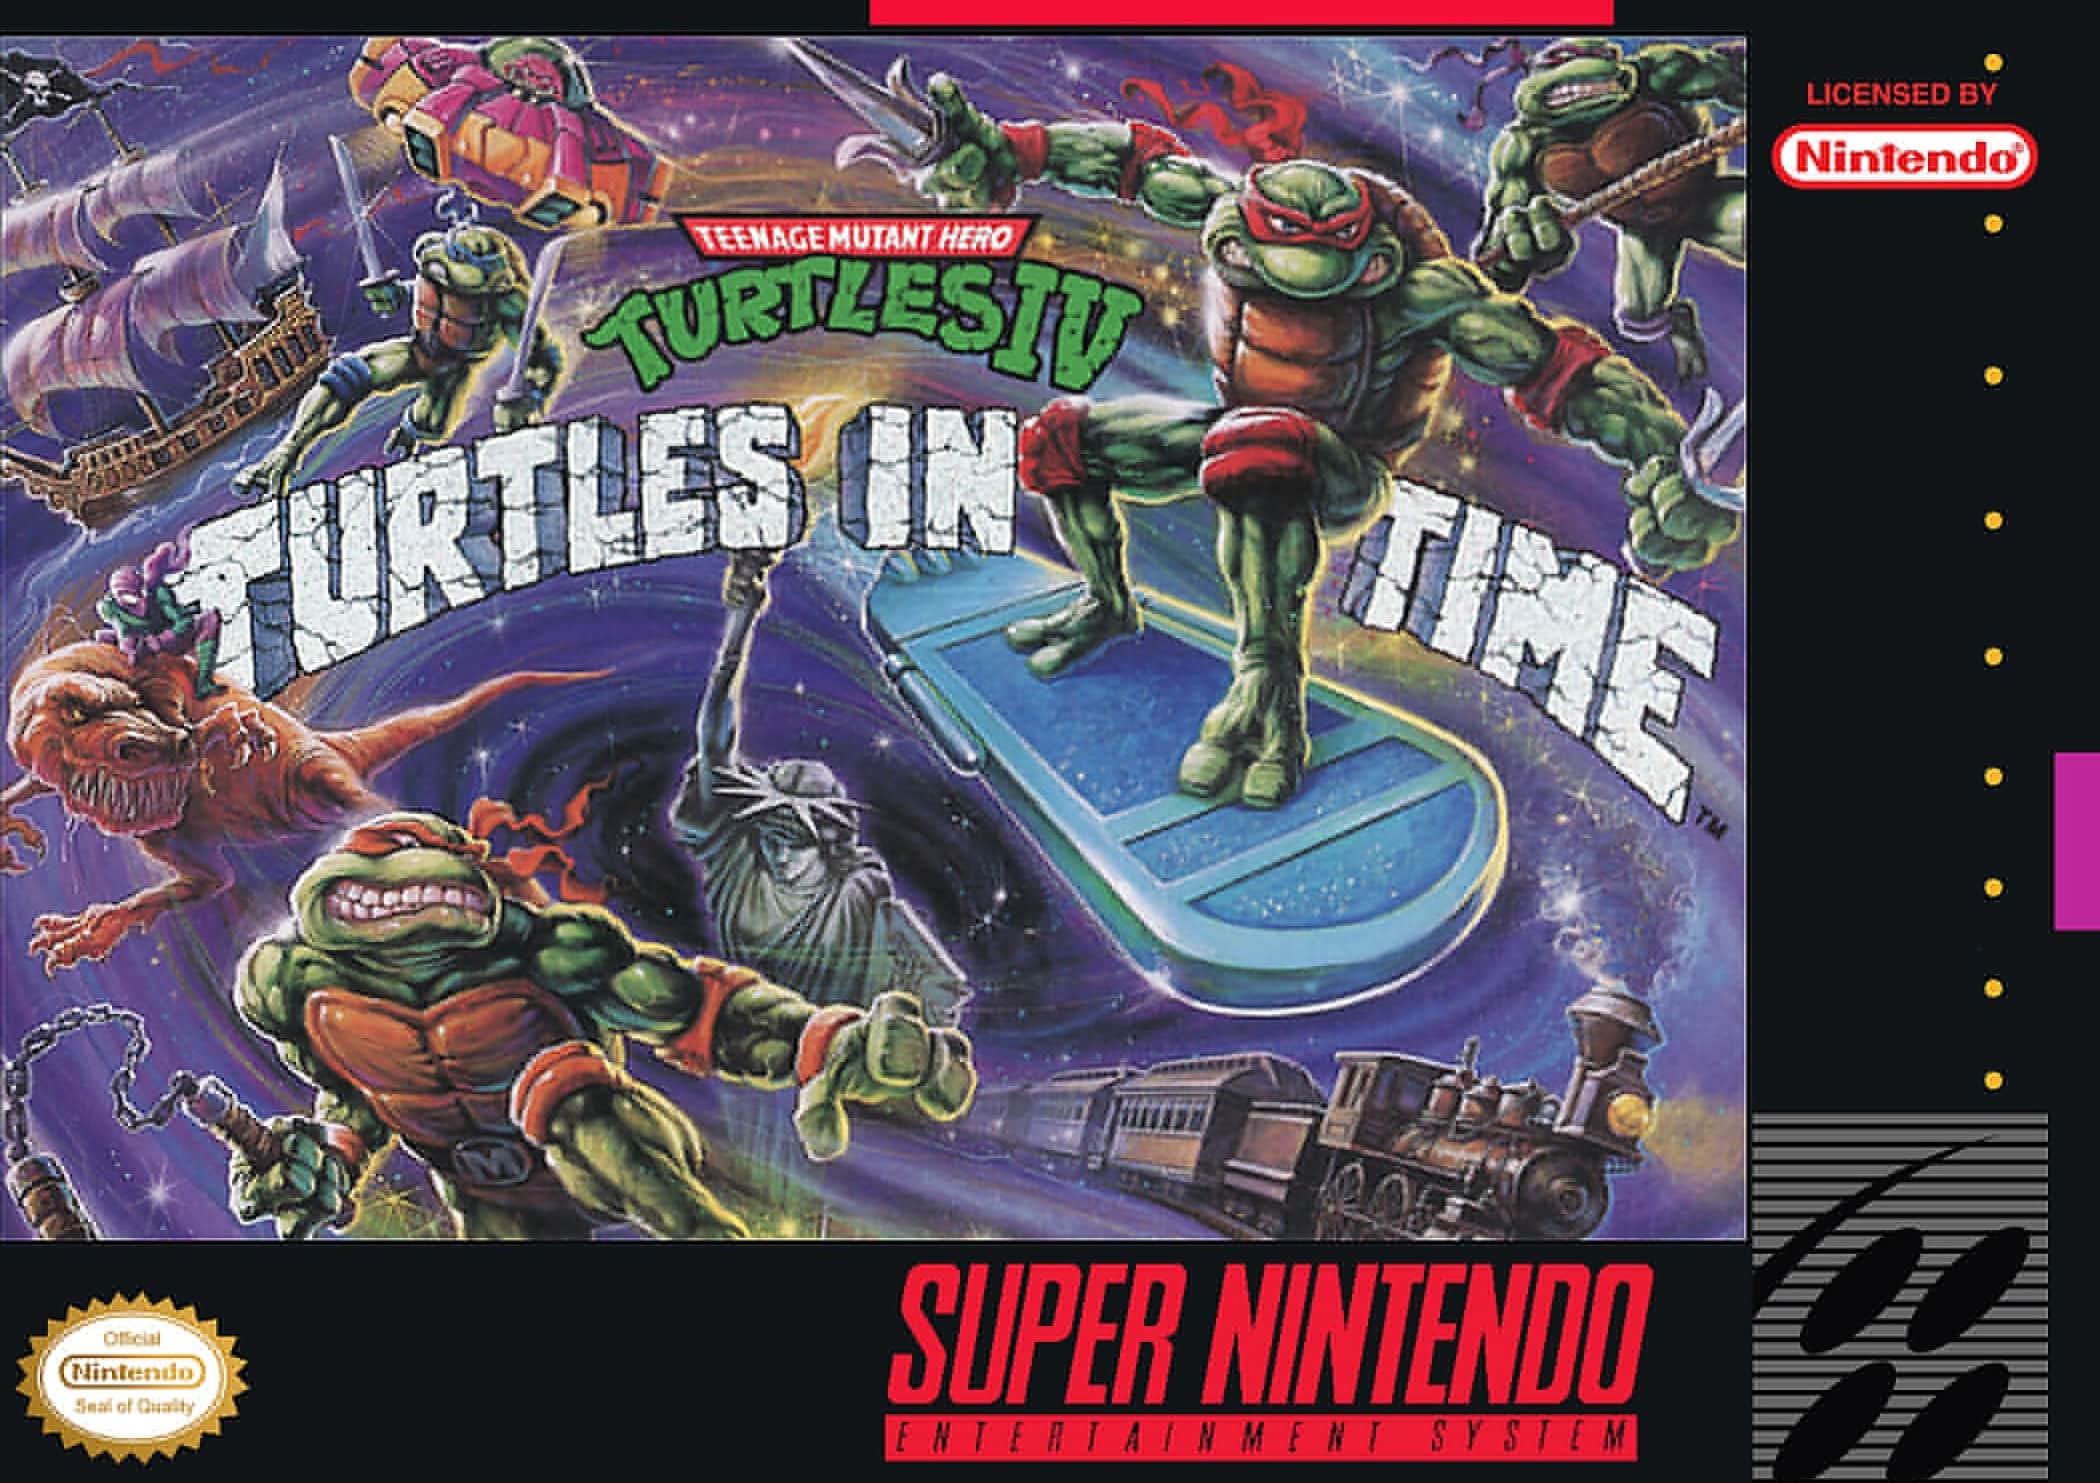 snes teenage mutant ninja turtles 4 p 7s3gu7 5 More Games You Should Install on Your SNES Classic